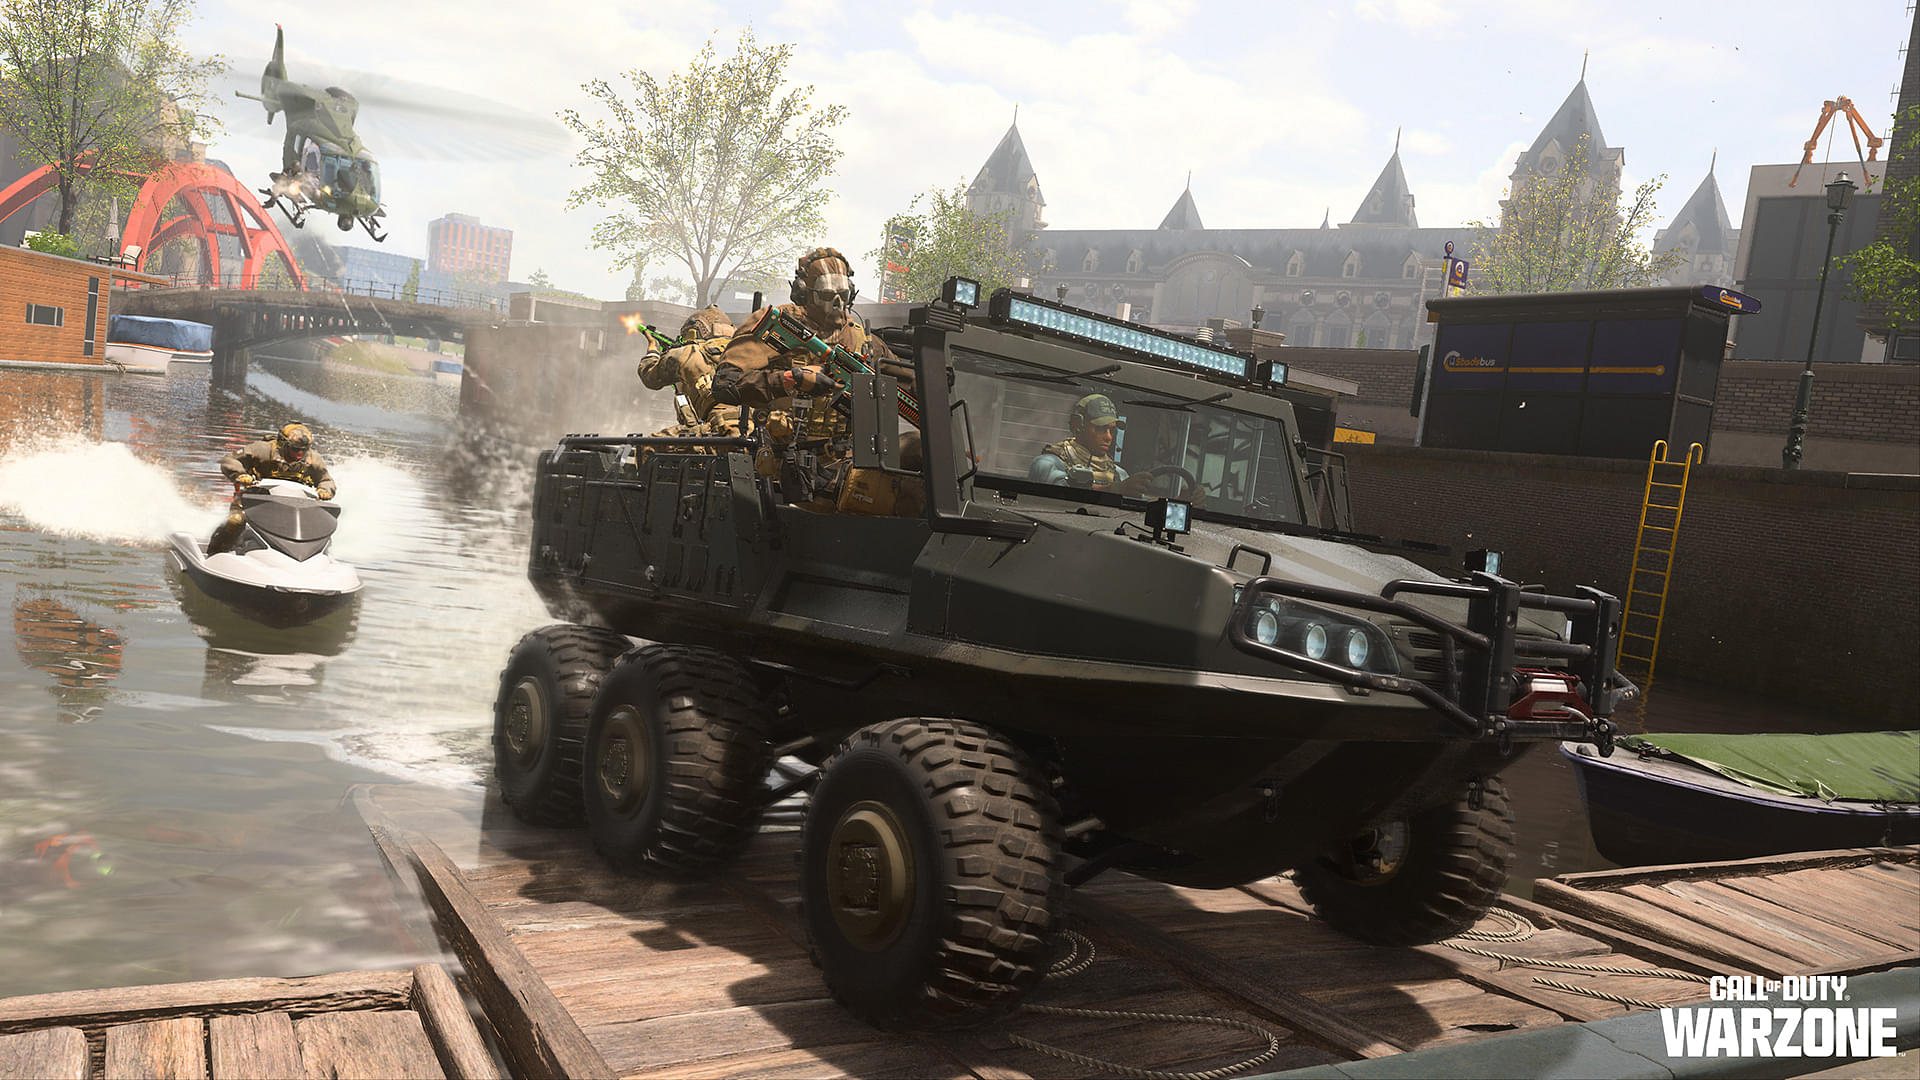 An Image of a Soldier inside a Jeep in Warzone 2